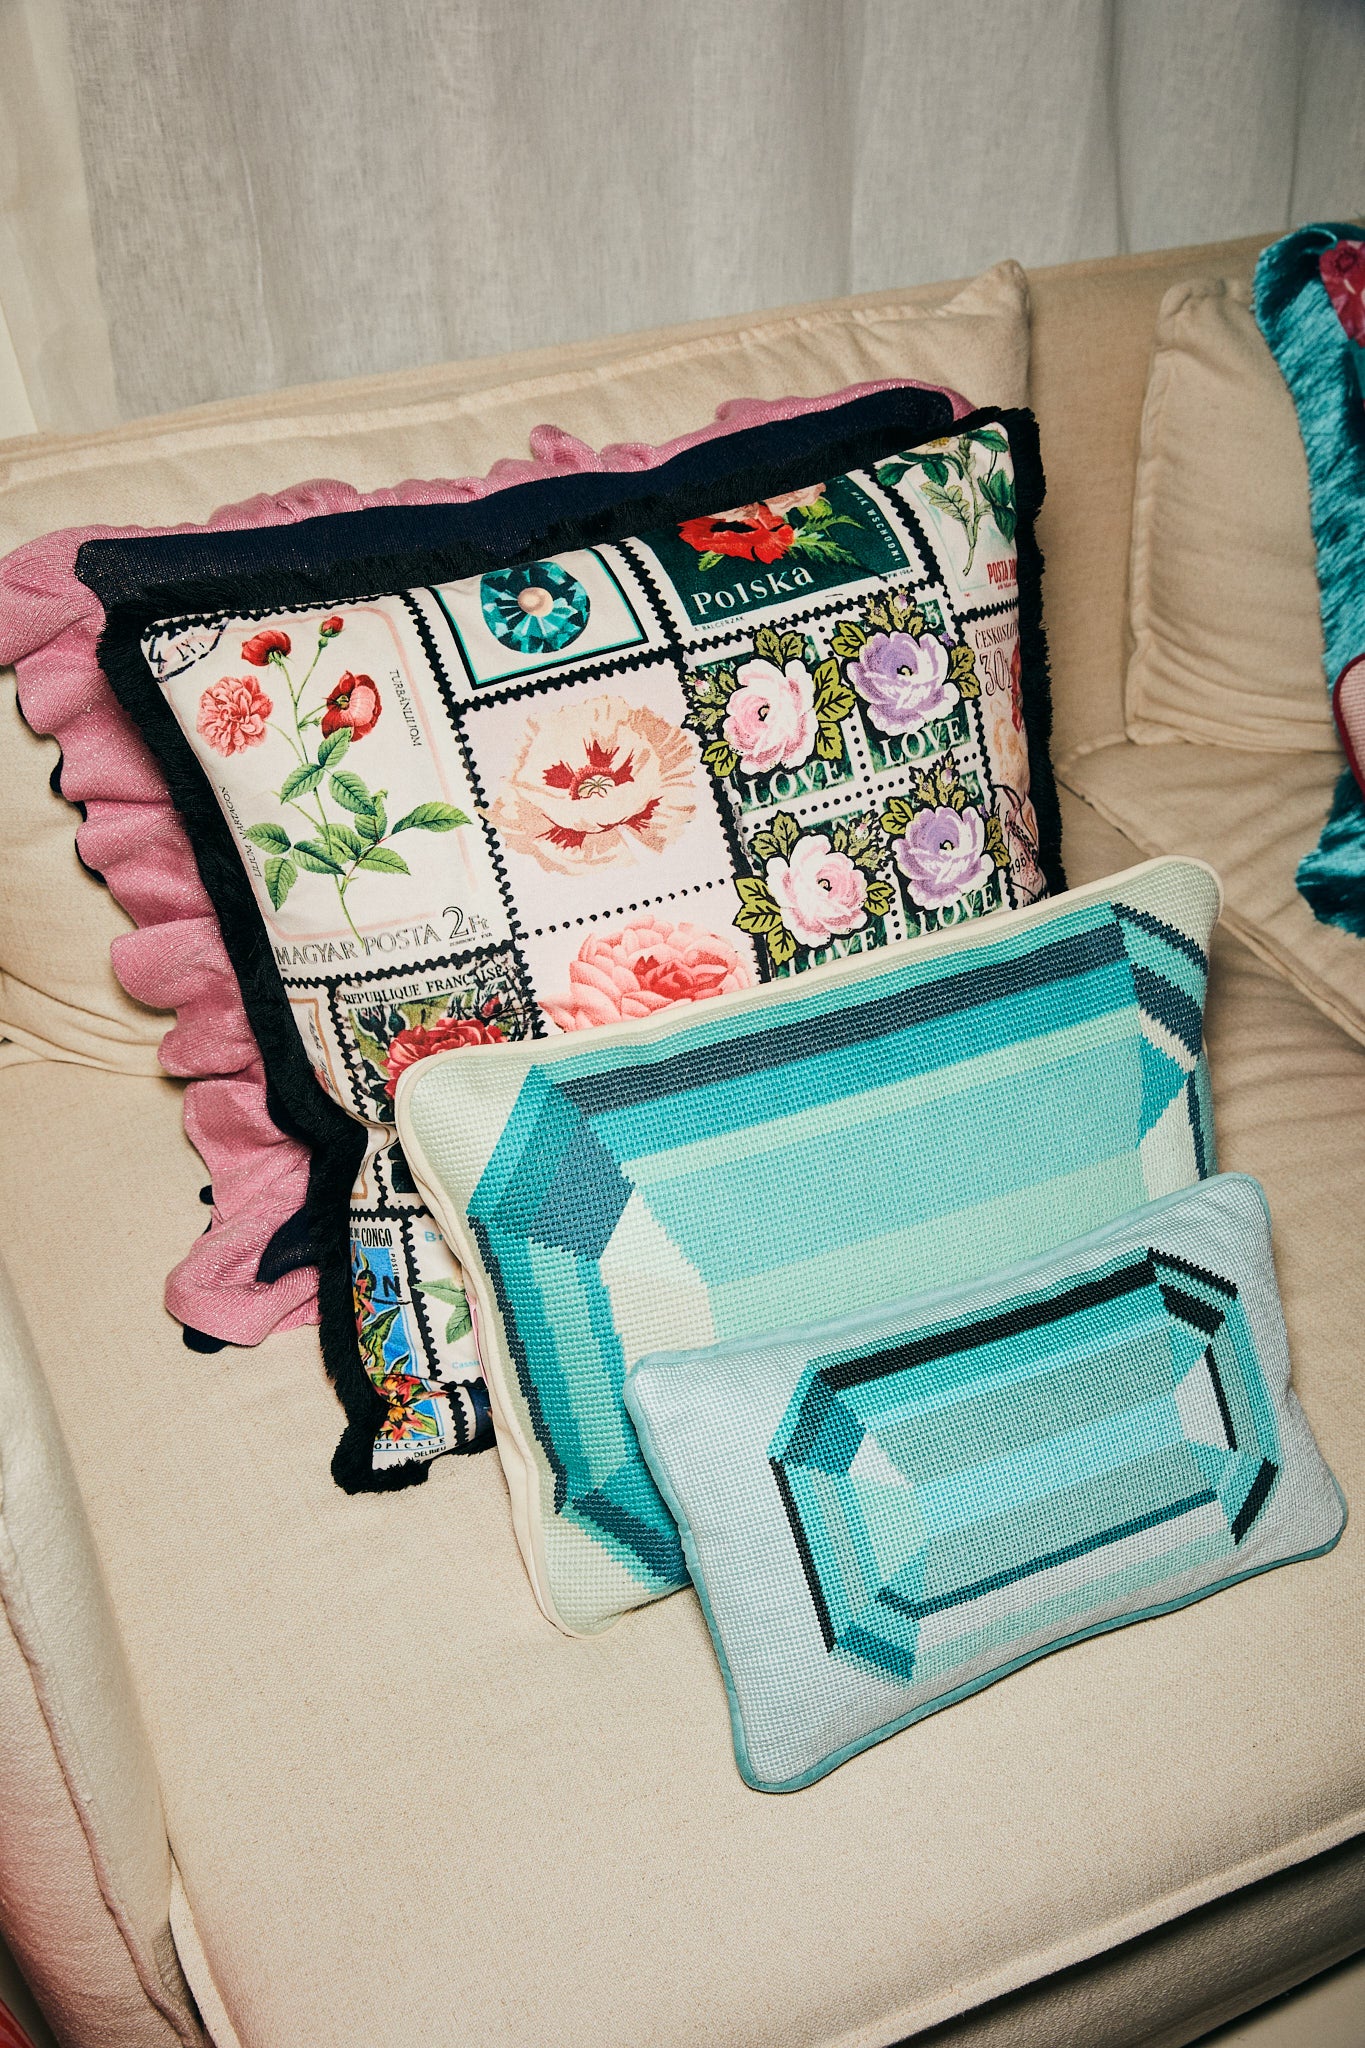 The Blue Emerald Embroidered Needle Point Cushion